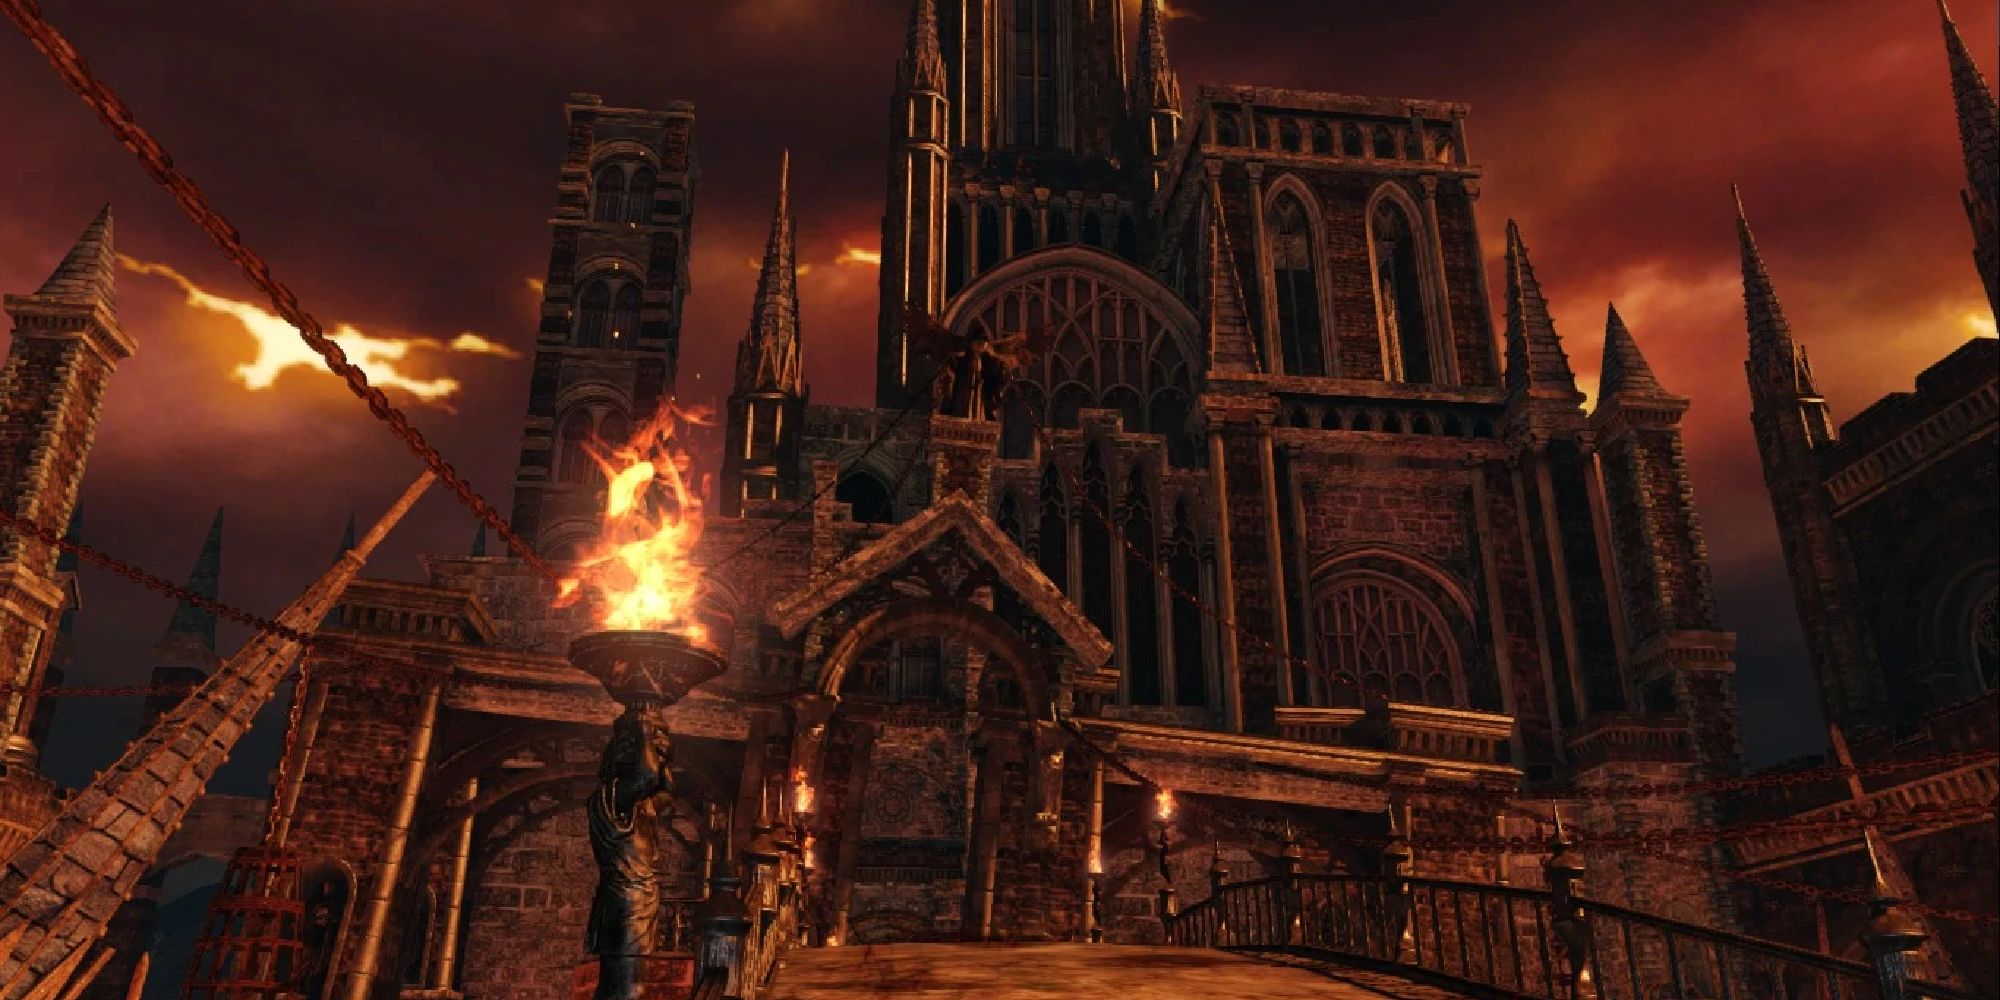 The imposing exterior of the Iron Keep castle in Dark Souls 2